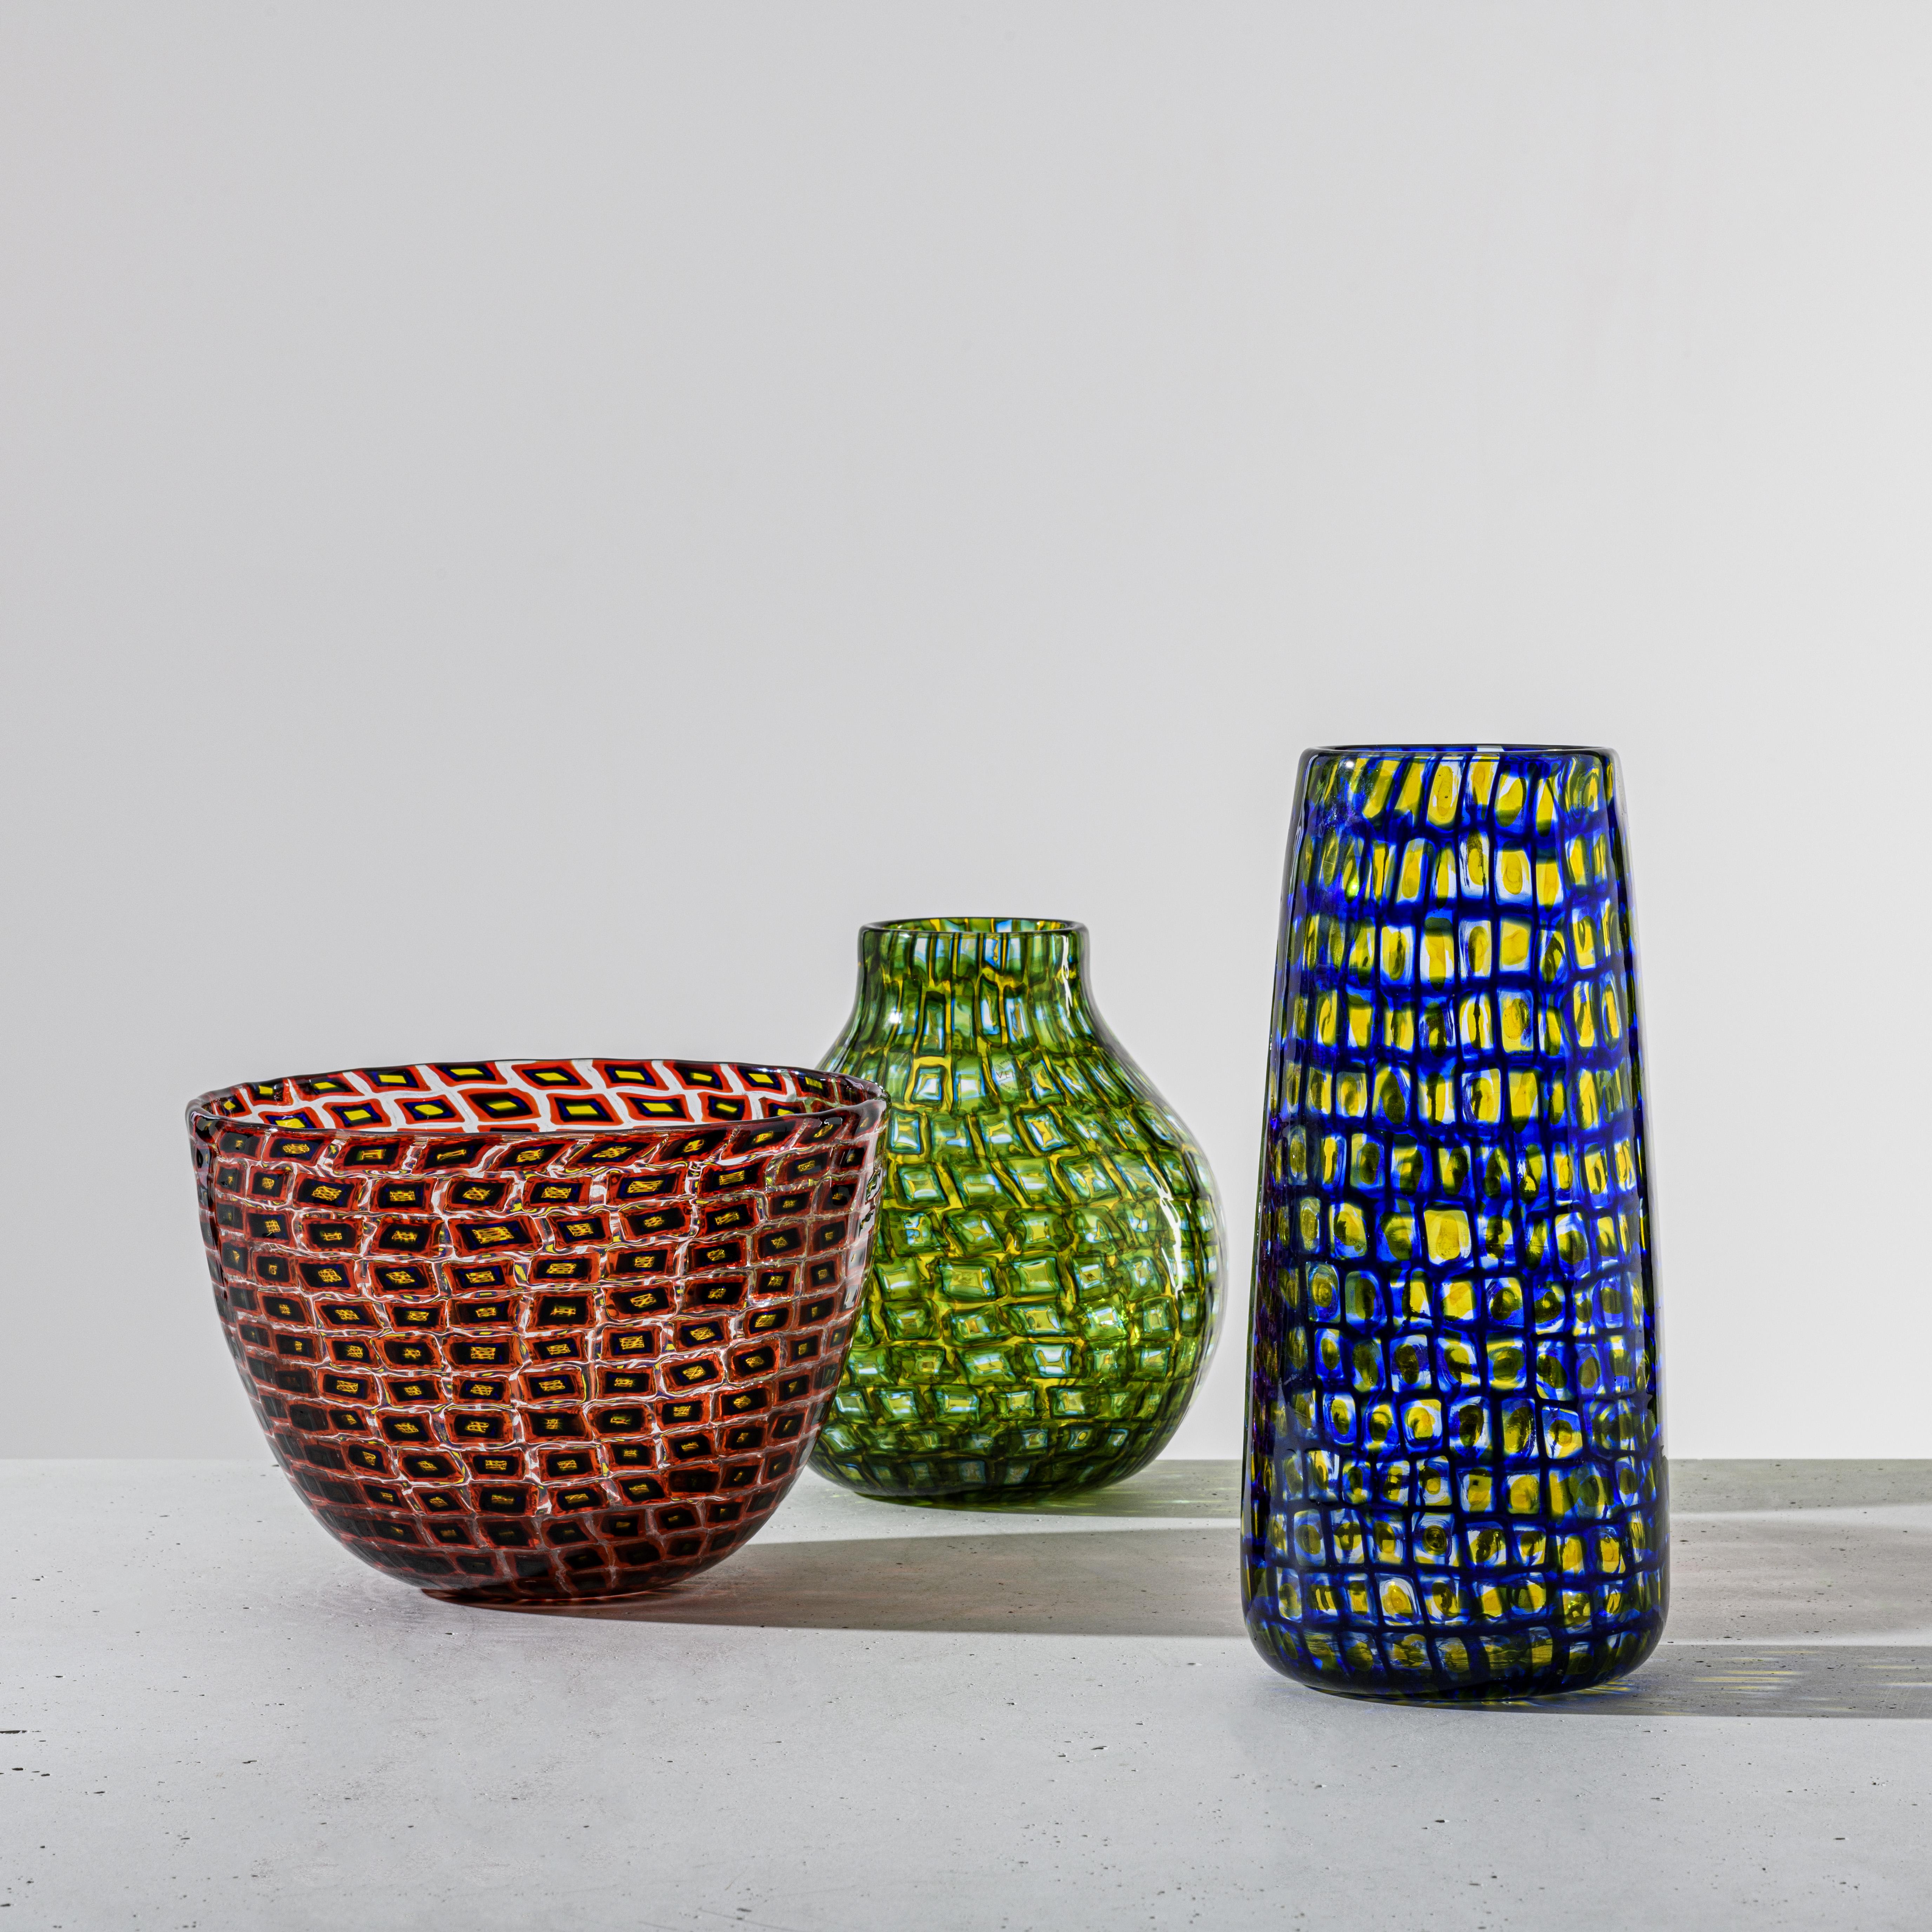 Venini Murrine Romane vase in multi-color by Carlo Scarpa. Numbered Edition. These Murrine are called “roman” due to their graphic signs and because they seem to create an optical illusion. They are a rare and precious object like it was popular